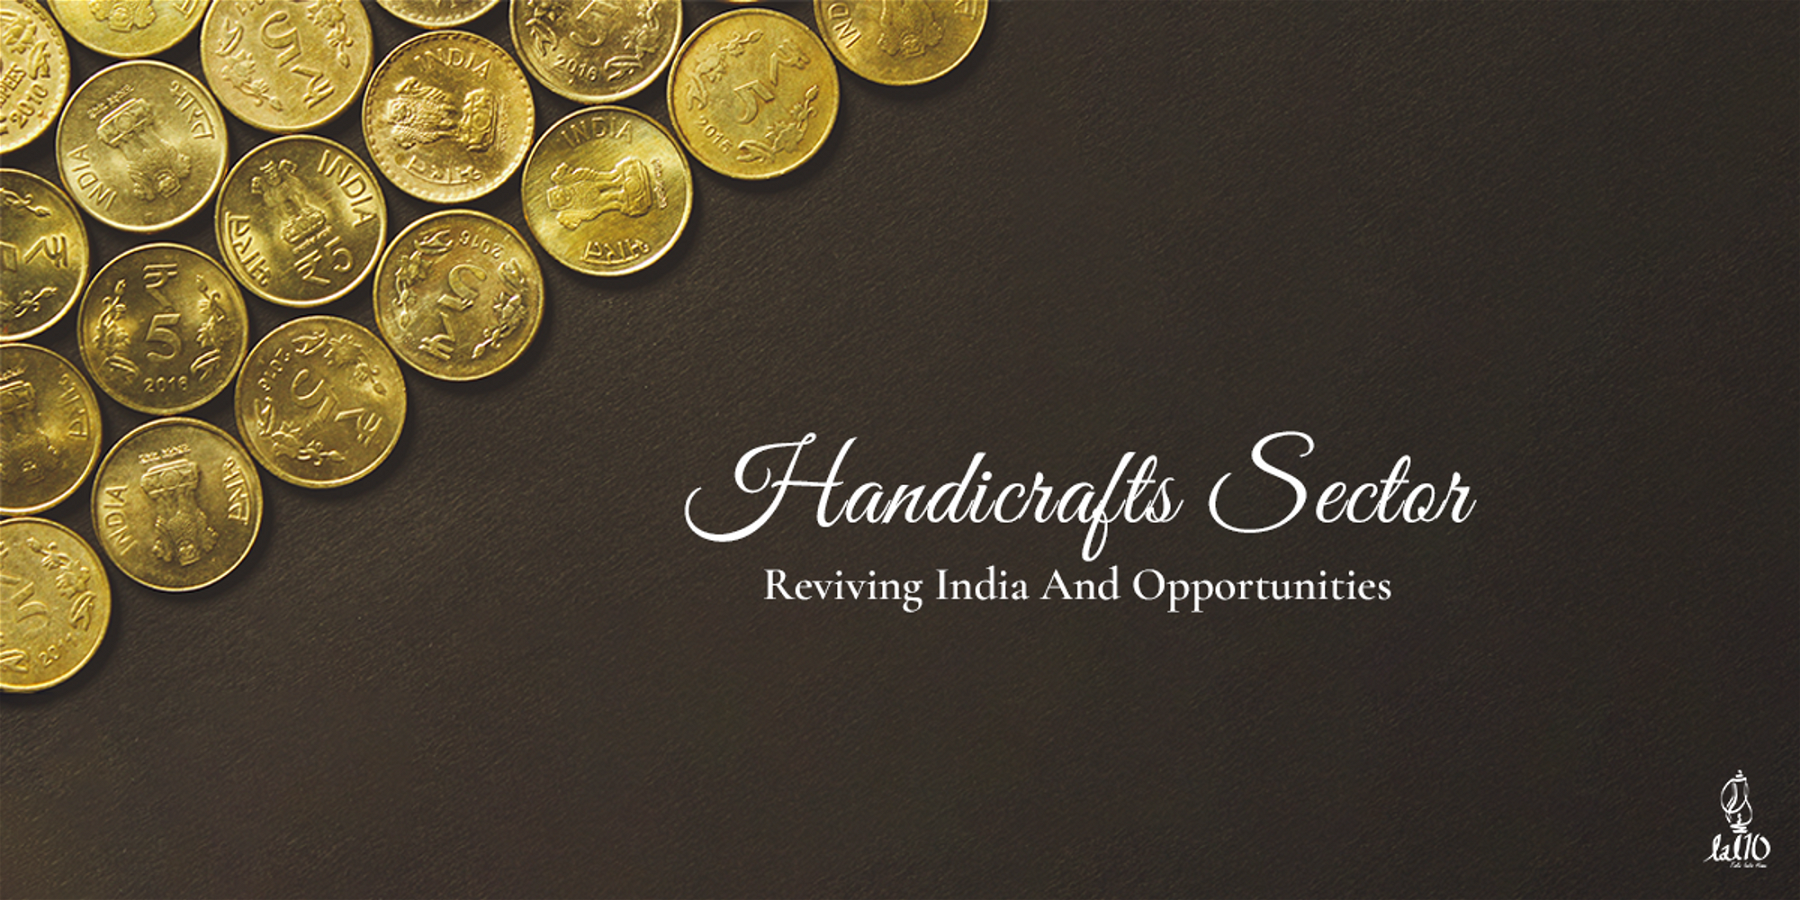 Handicrafts Sector: Reviving India And Opportunities